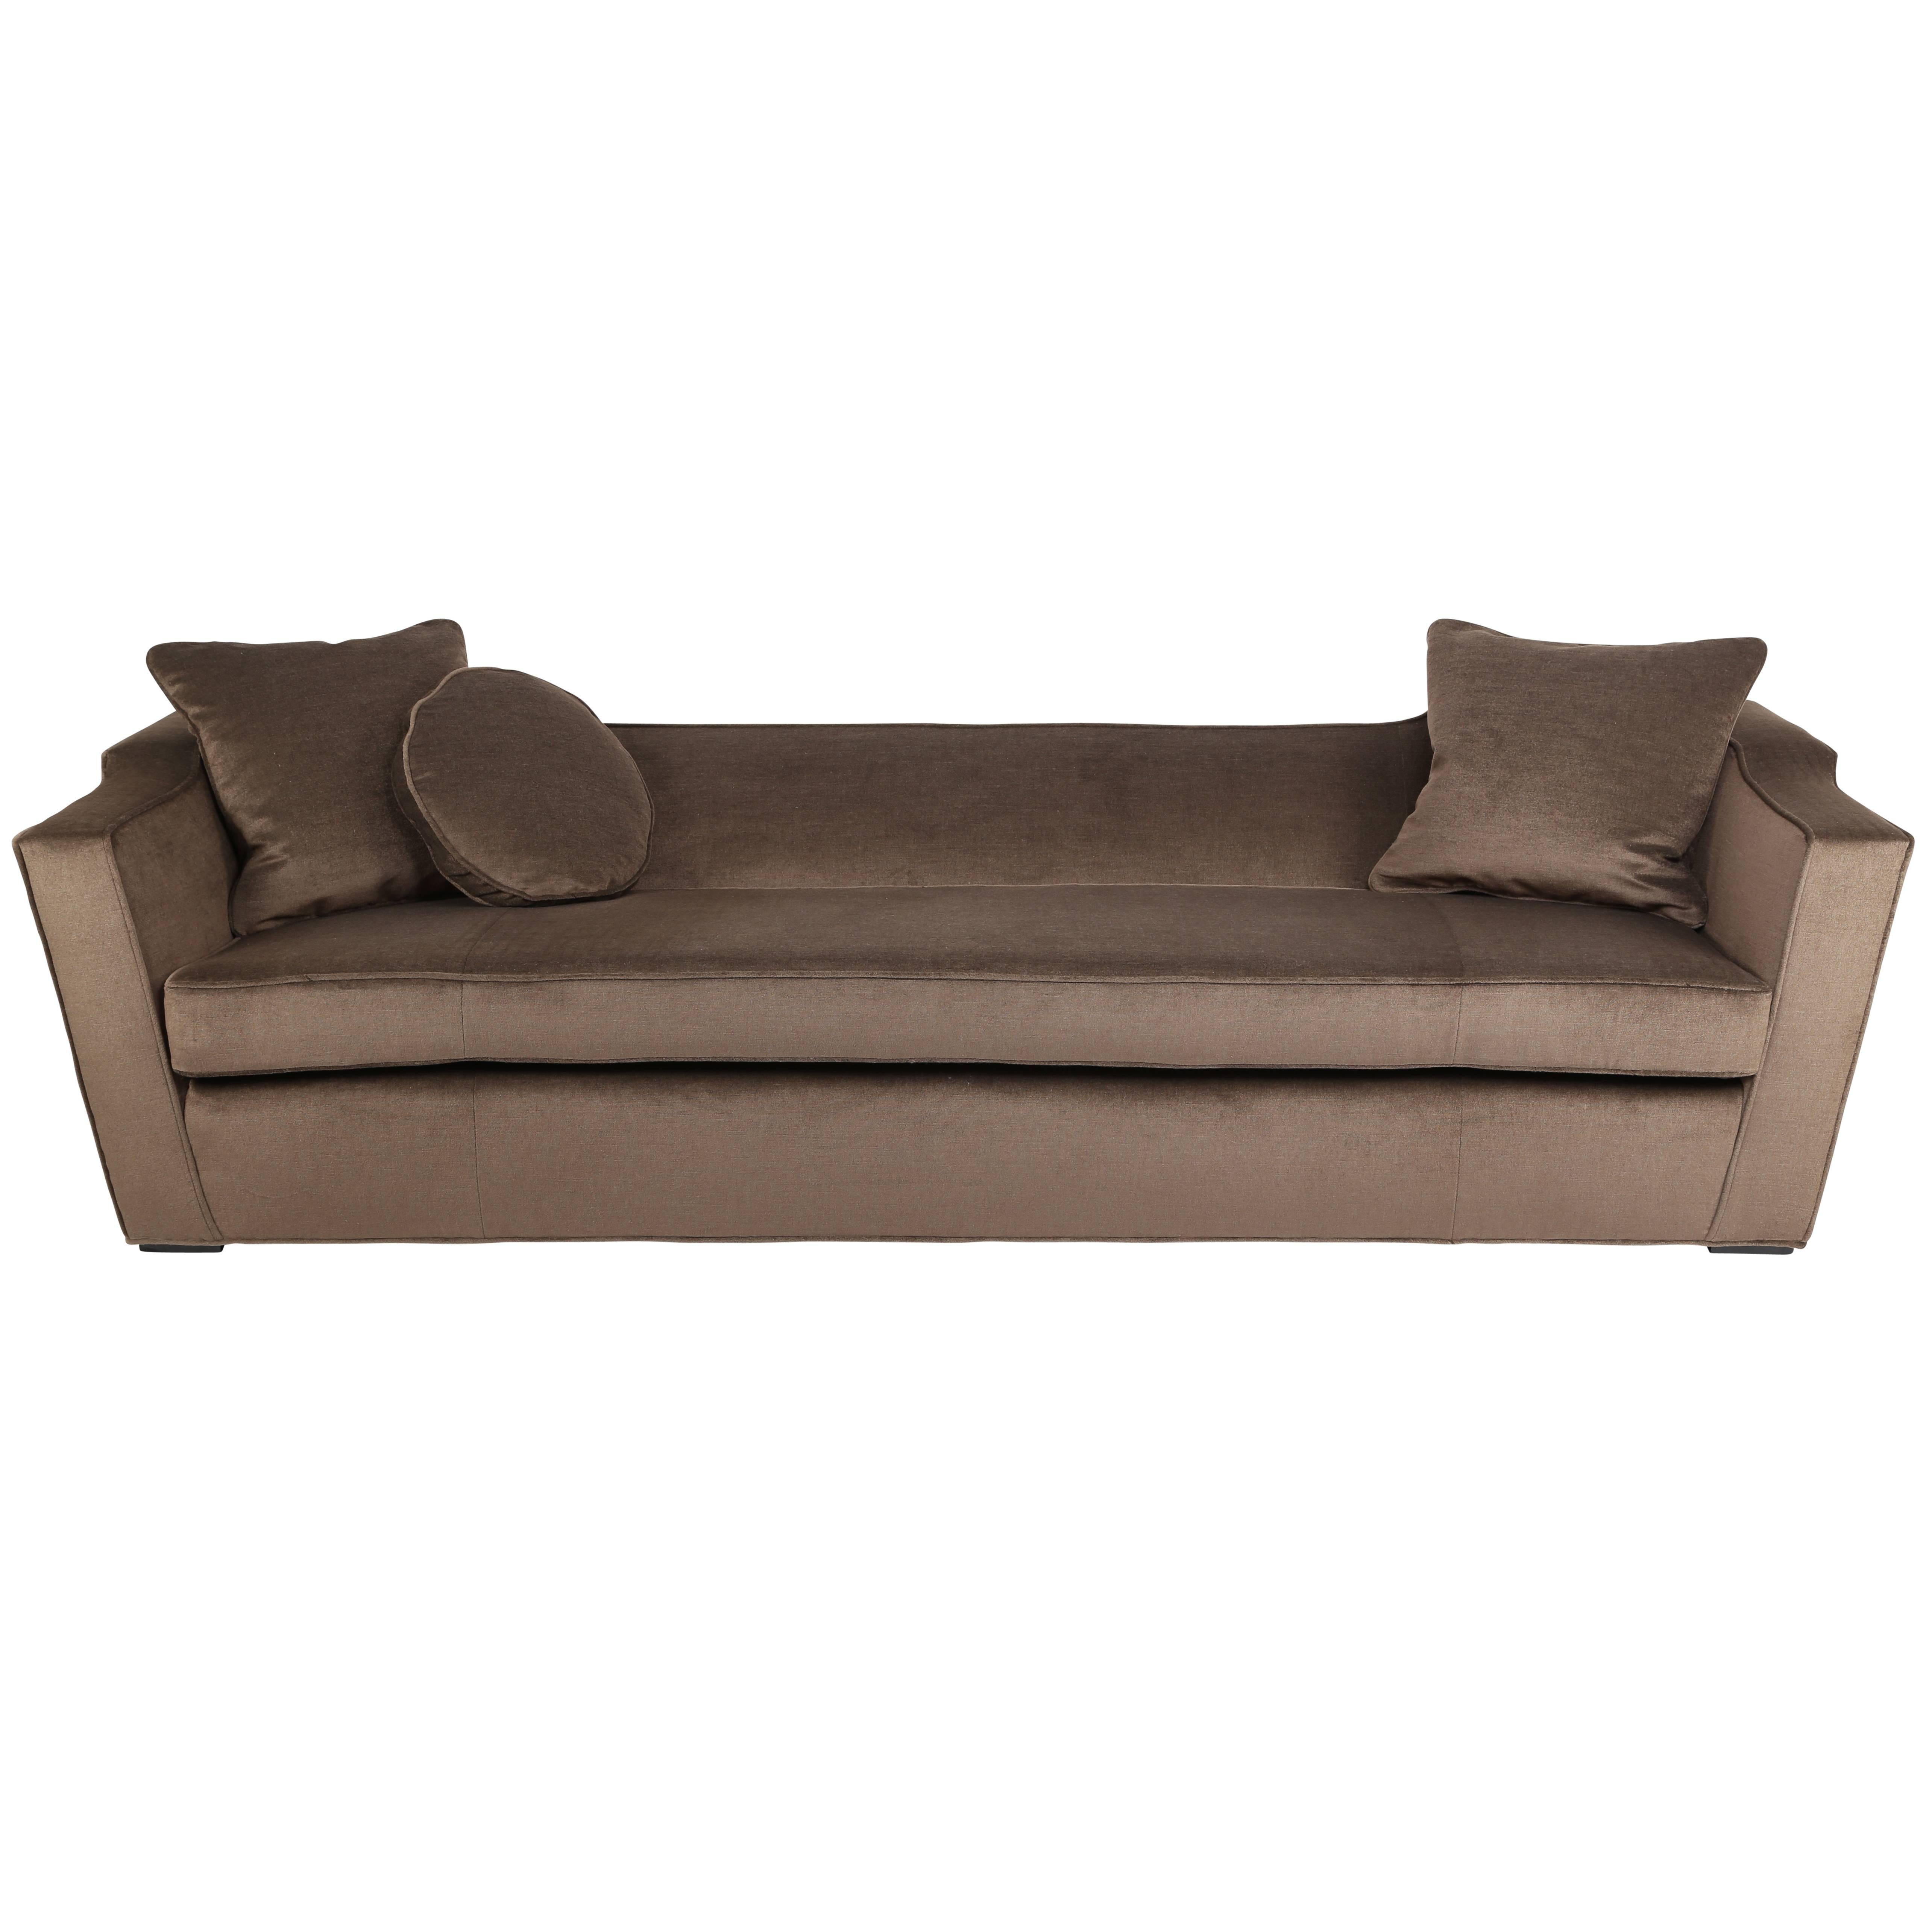 Large-scale sofa by James Mont beautifully reupholstered in a luxurious and durable chocolate-brown mohair velvet. The flared arms and back feature a raised detail that adds interest to an otherwise streamlined design. Beautifully built in the 1950s